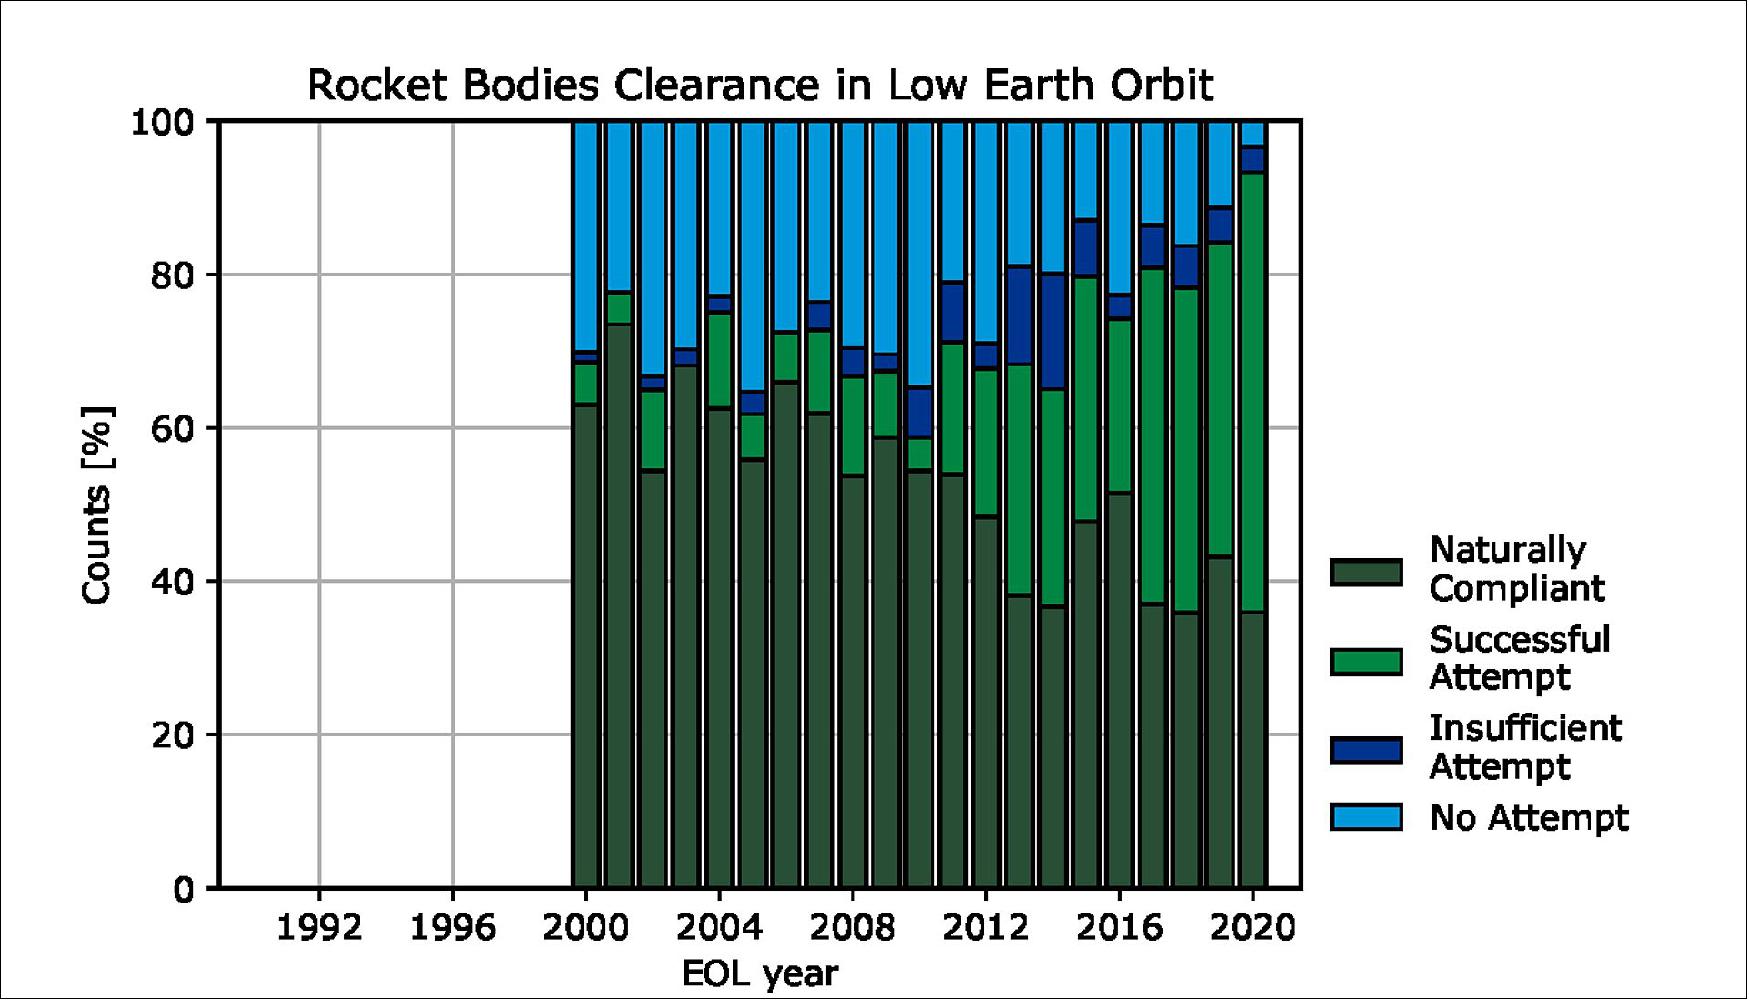 Figure 14: One of the most positive stories in debris mitigation has played out in the last 20 years as rocket bodies – the largest objects we send to space – are now nearly all disposed of sustainably compared to less than 20% at the turn of the millennium. This is because more rockets now perform a “controlled reentry” into Earth’s atmosphere (image credit: ESA)